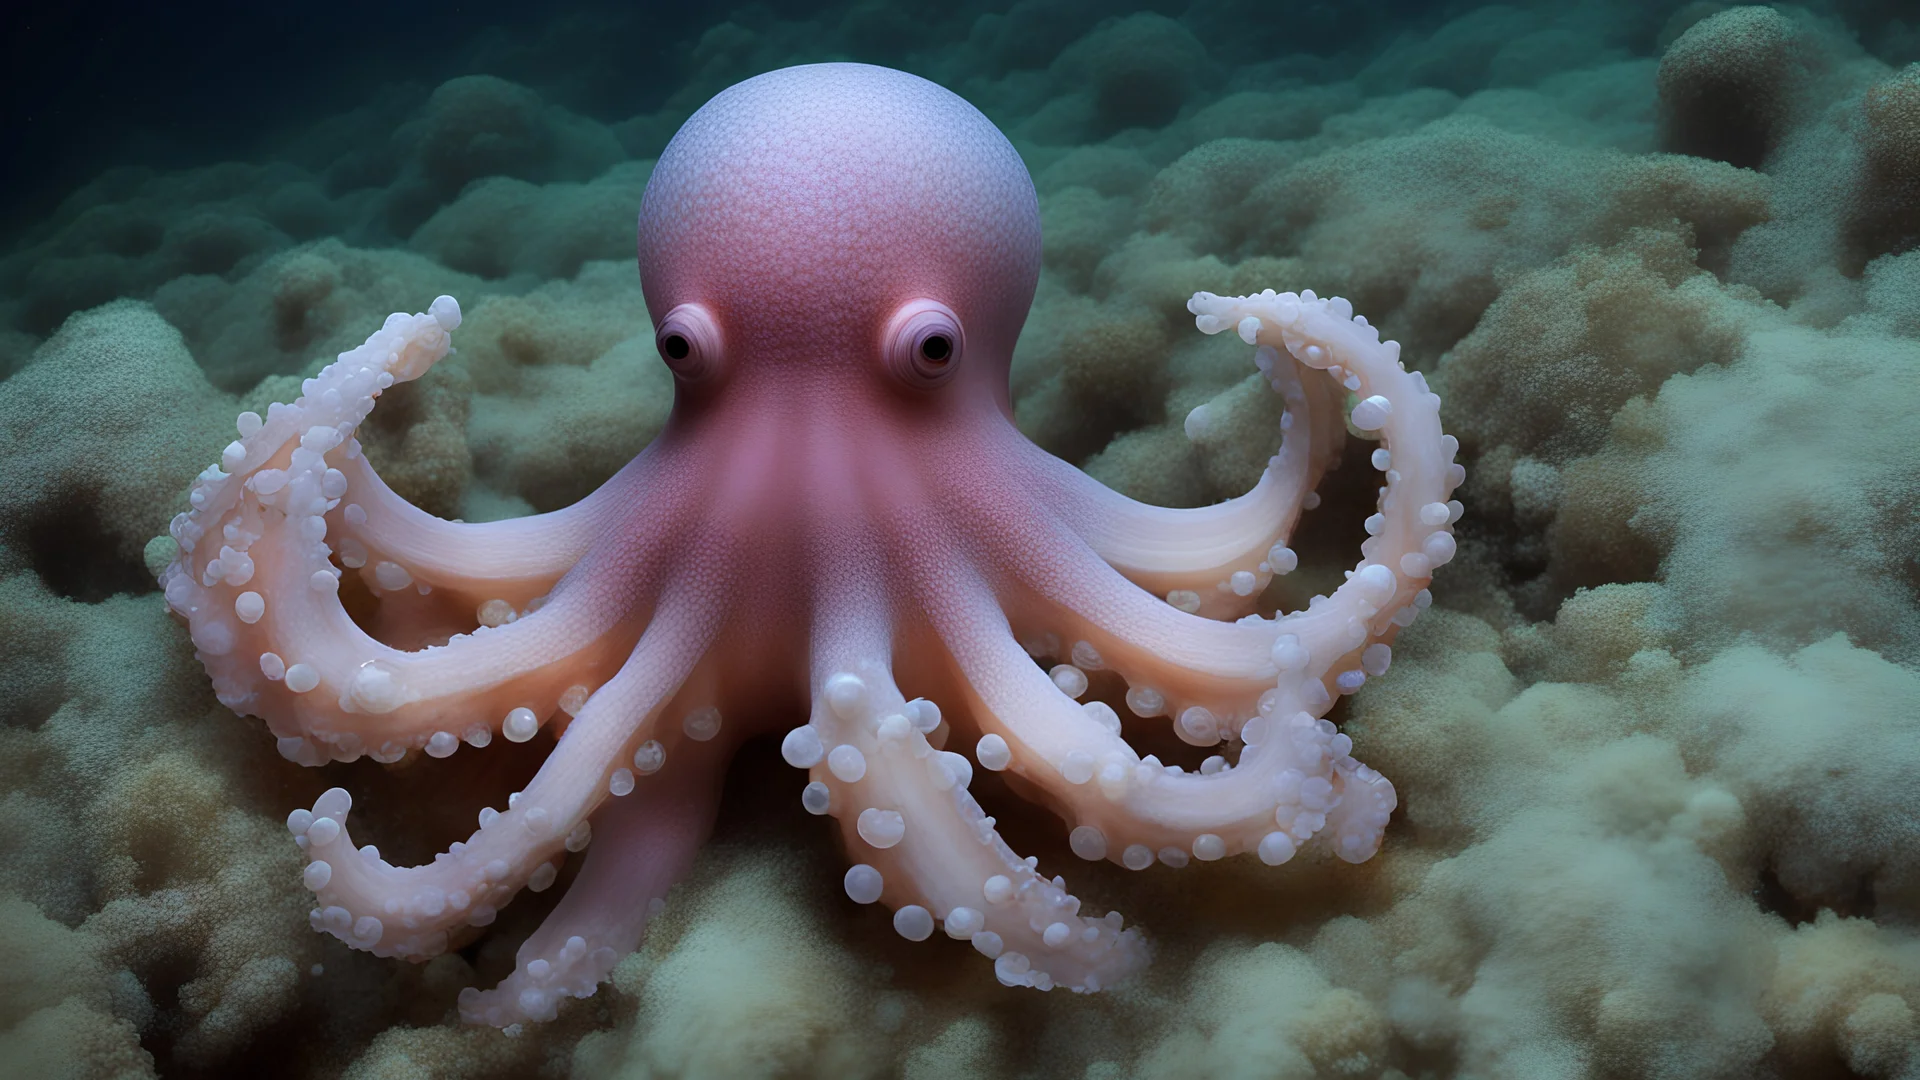 Last octopus of many has finally found the huge crystal of life.